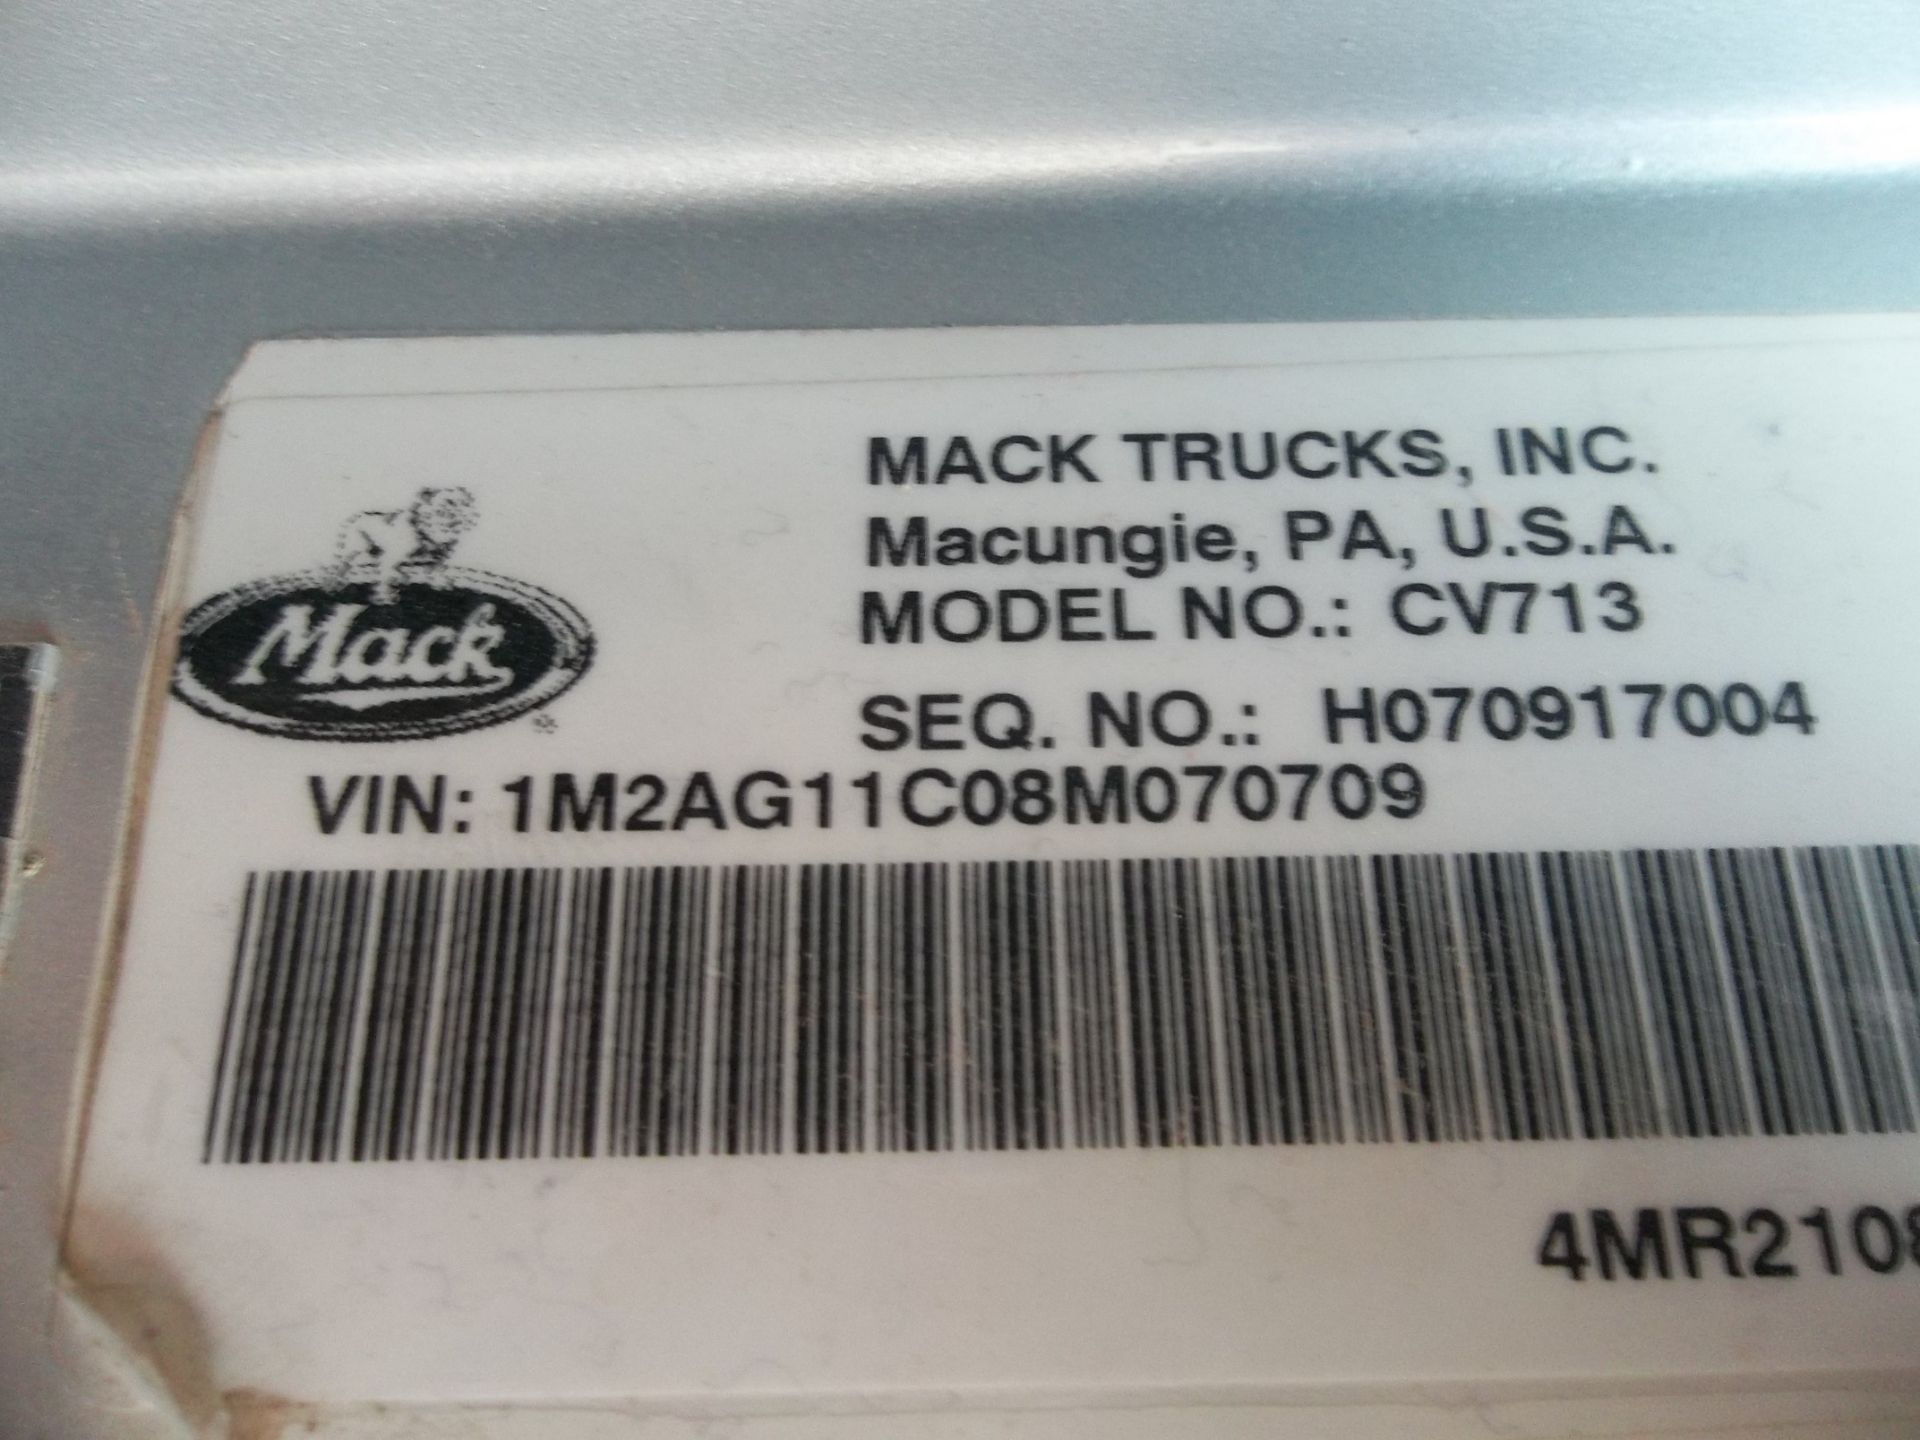 2008 Mack CV713 Cab & Chassis Truck, s/n 1m2ag11c08m070709,Mack E7 eng, 8 spd trans, od reads 170544 - Image 6 of 6